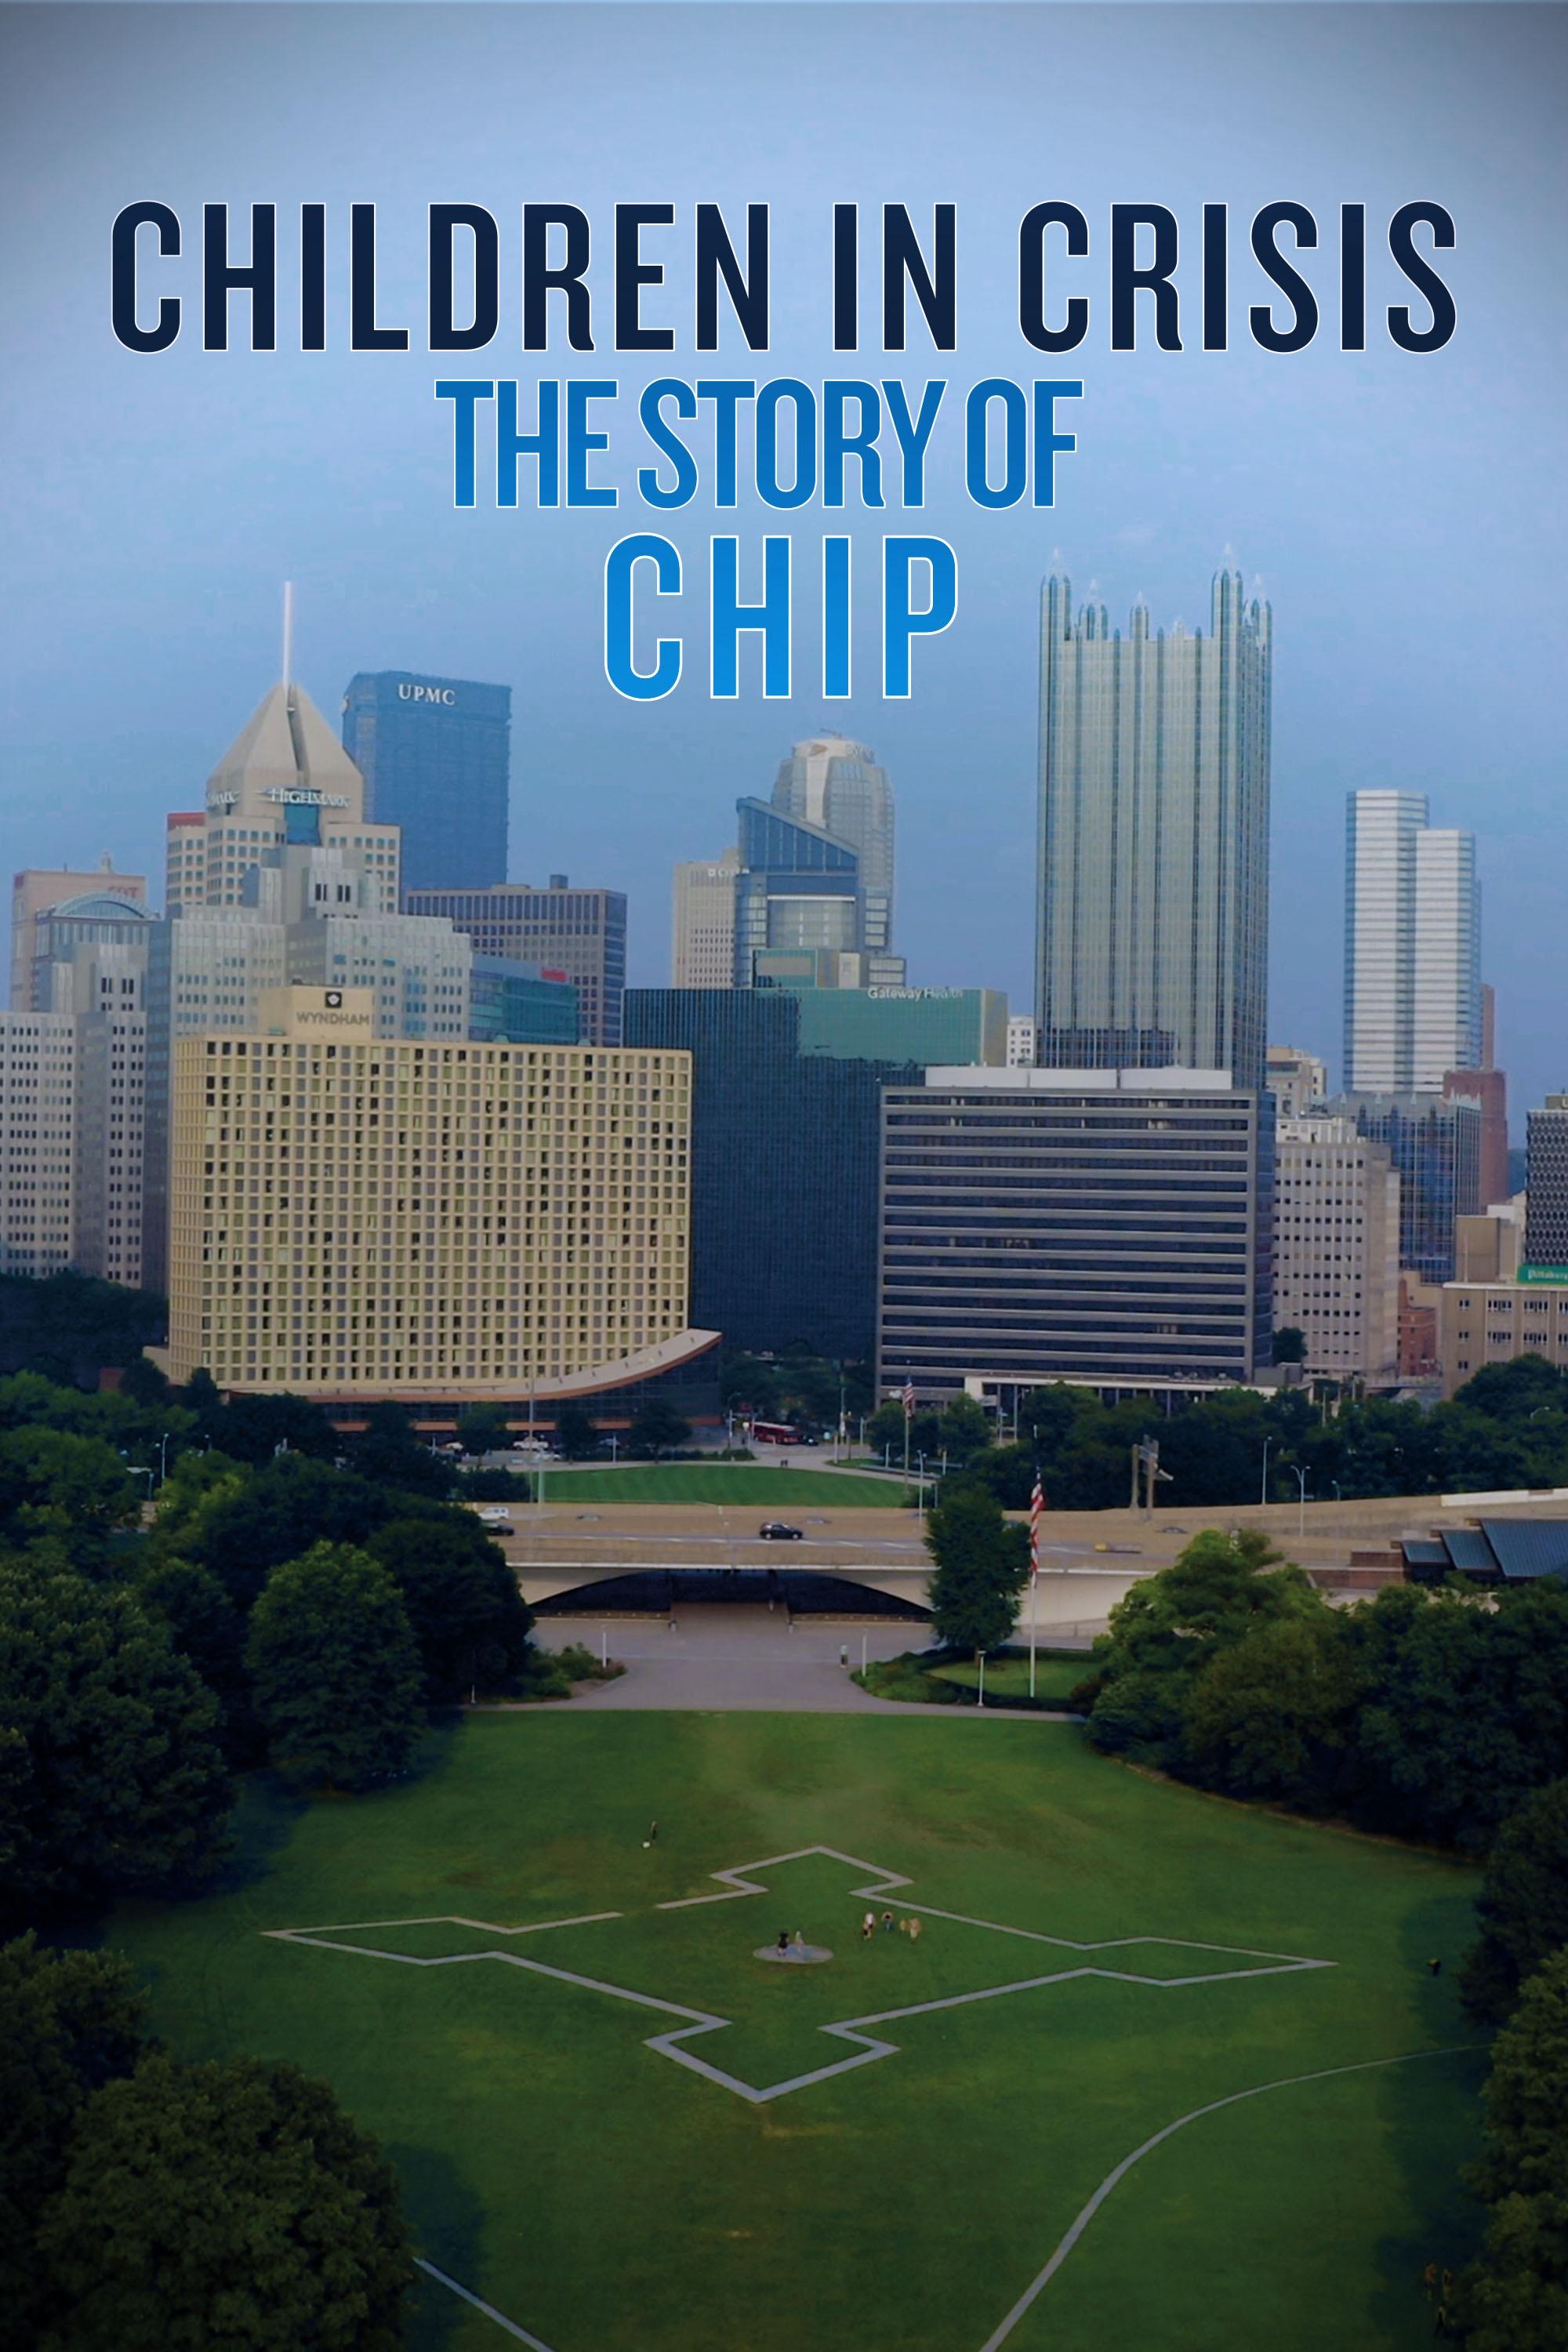 CHILDREN IN CRISIS: The Story of CHIP